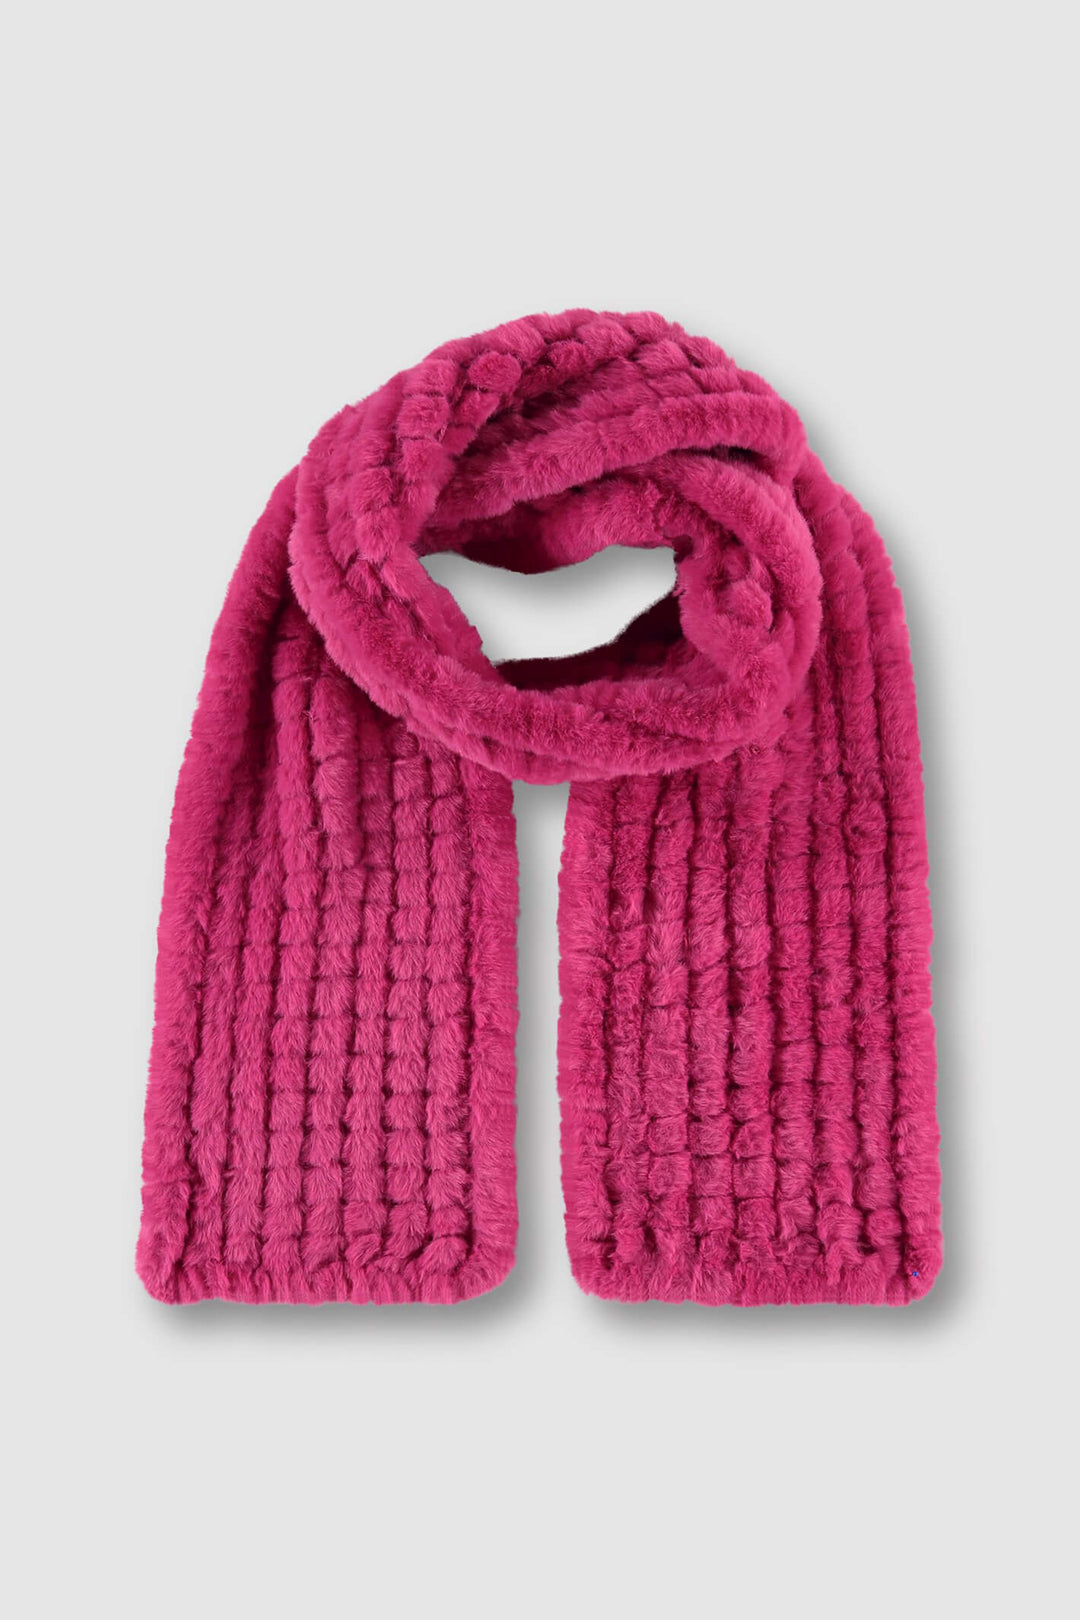 Rino & Pelle Afke 7002310 Barberry Pink Faux Fur Scarf - Dotique